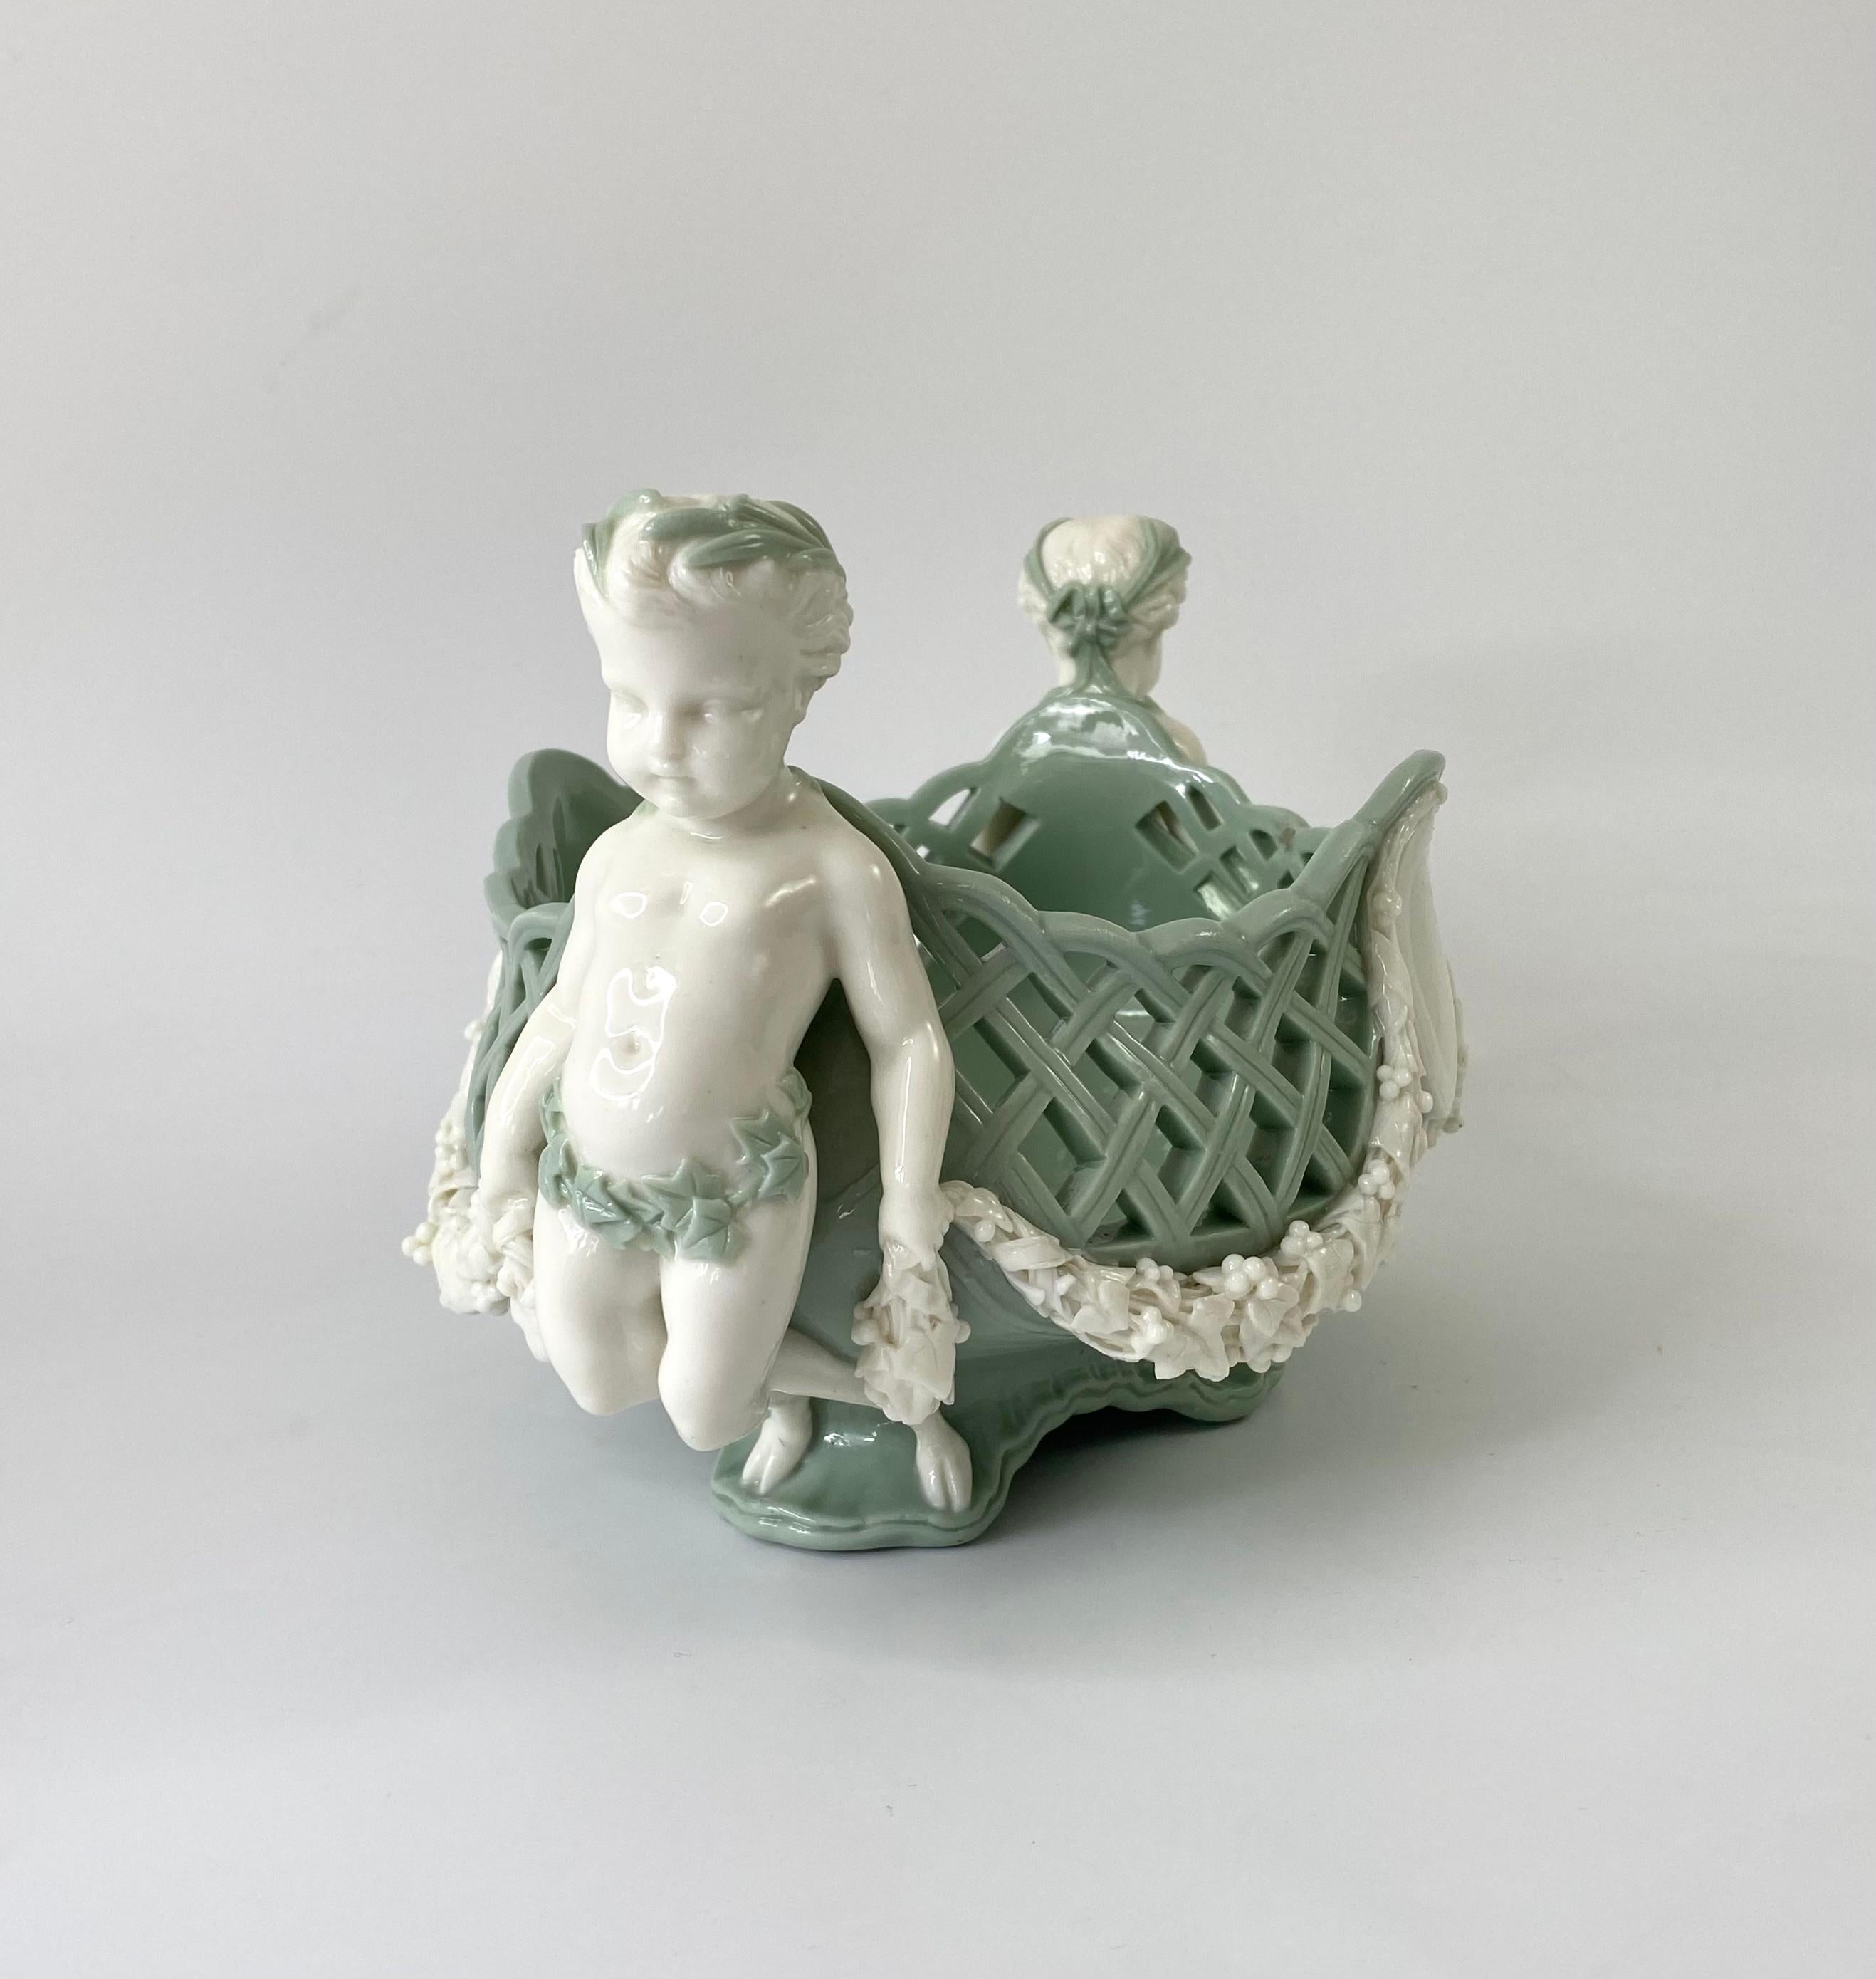 A fine Minton pate sur pate porcelain basket, dated 1867. The celadon green ground lattice worked basket, supported by two Bacchanalian cherubs, and set upon scroll feet. The cherubs hold between them, a graping vine swag, suspended over twin oval